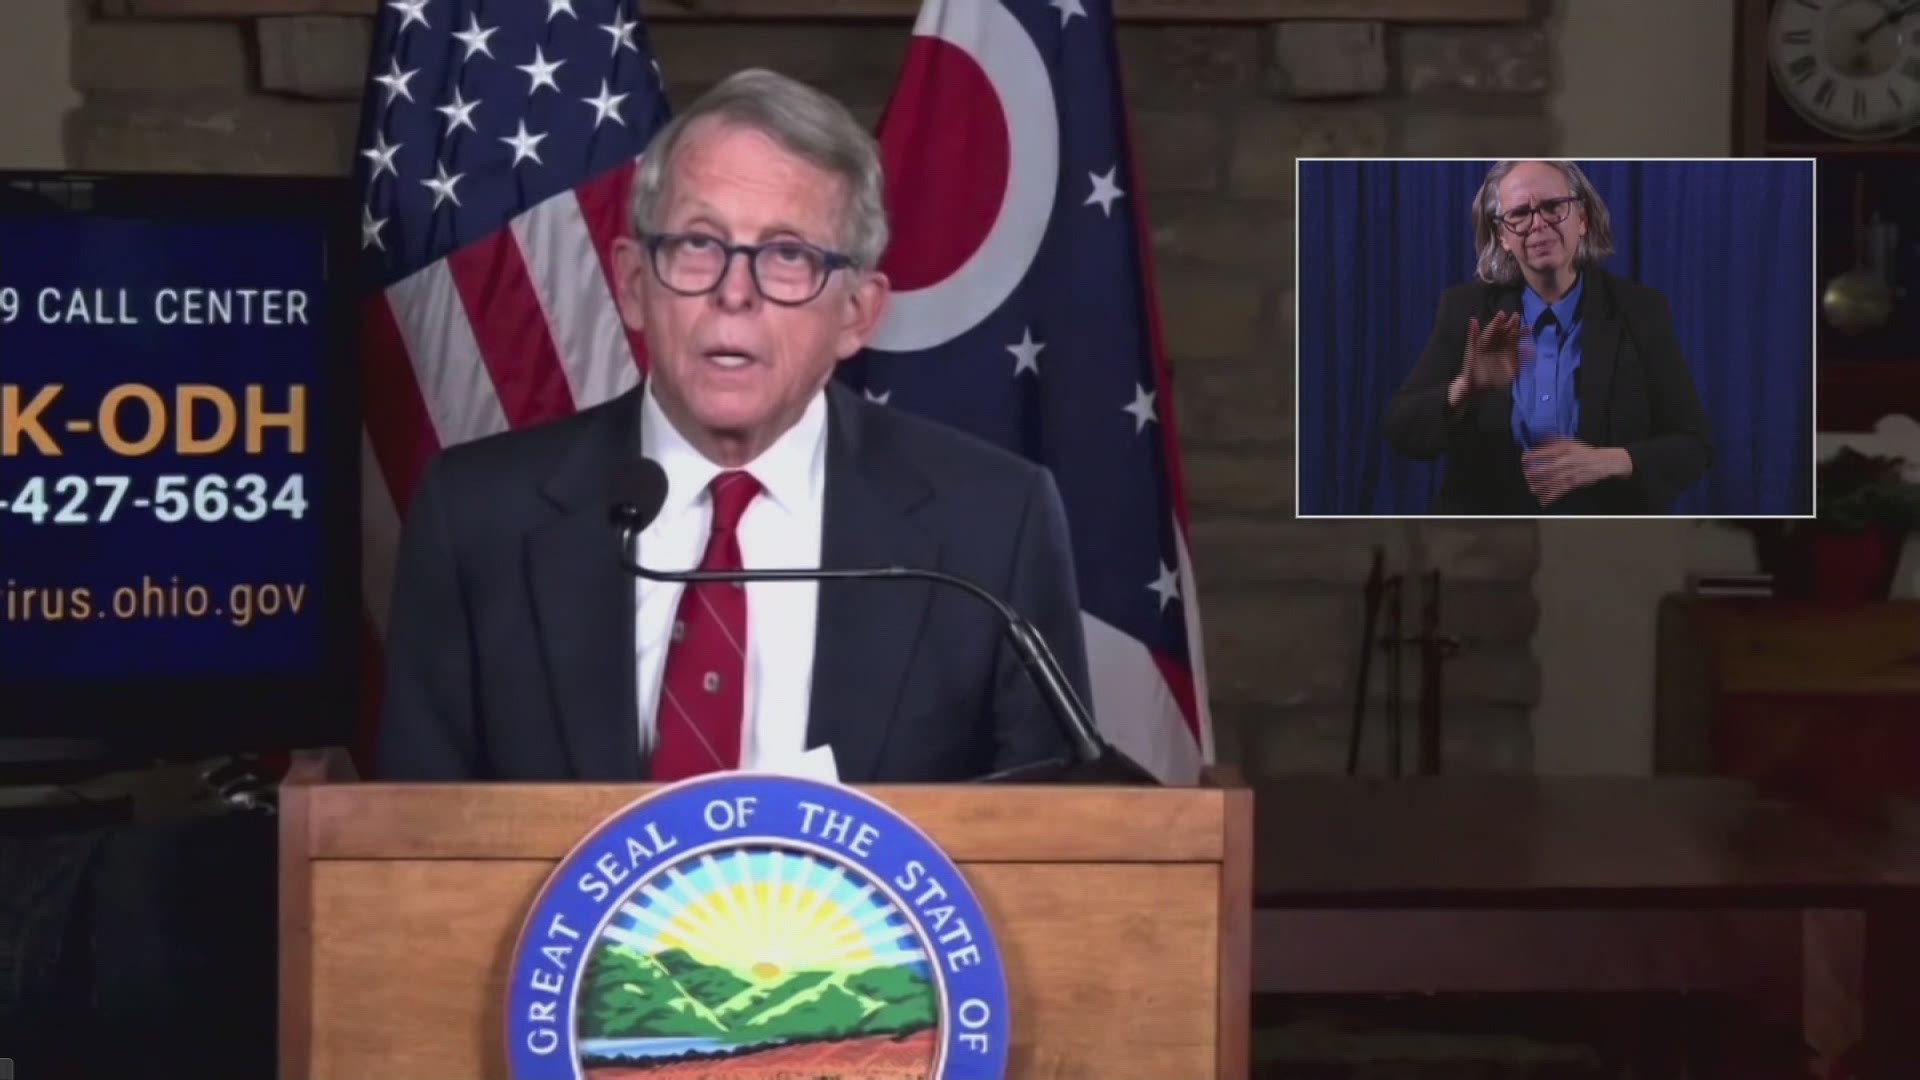 At his press briefing on Wednesday, Ohio Gov. Mike DeWine stressed the need for urgency regarding the distribution of the coronavirus vaccine.